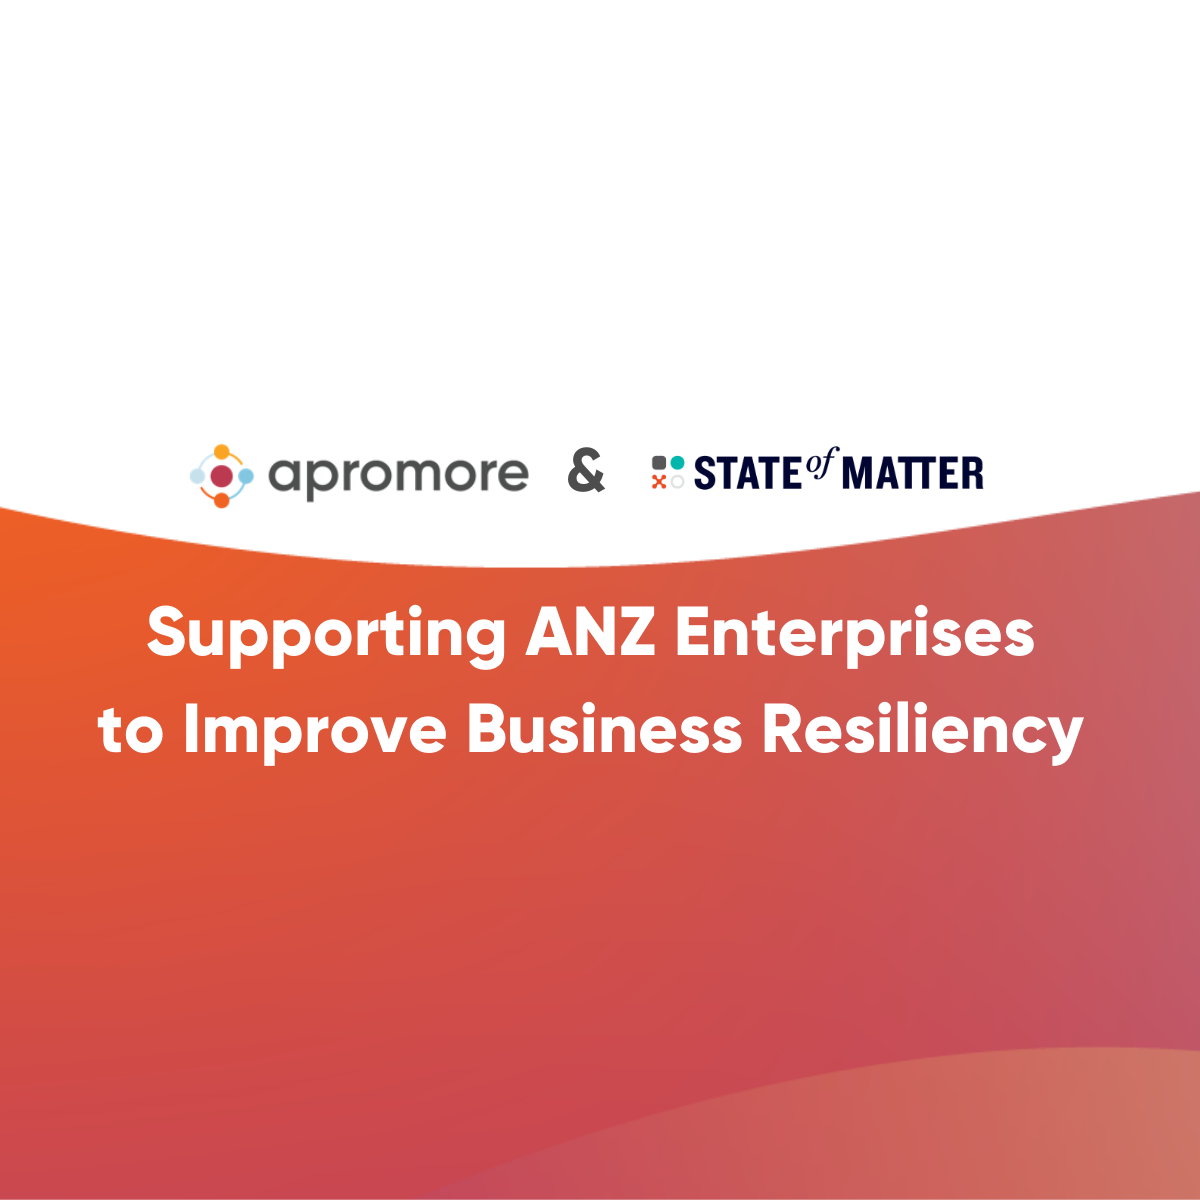 Apromore and State of Matter Partner to Improve Business Resiliency in ANZ